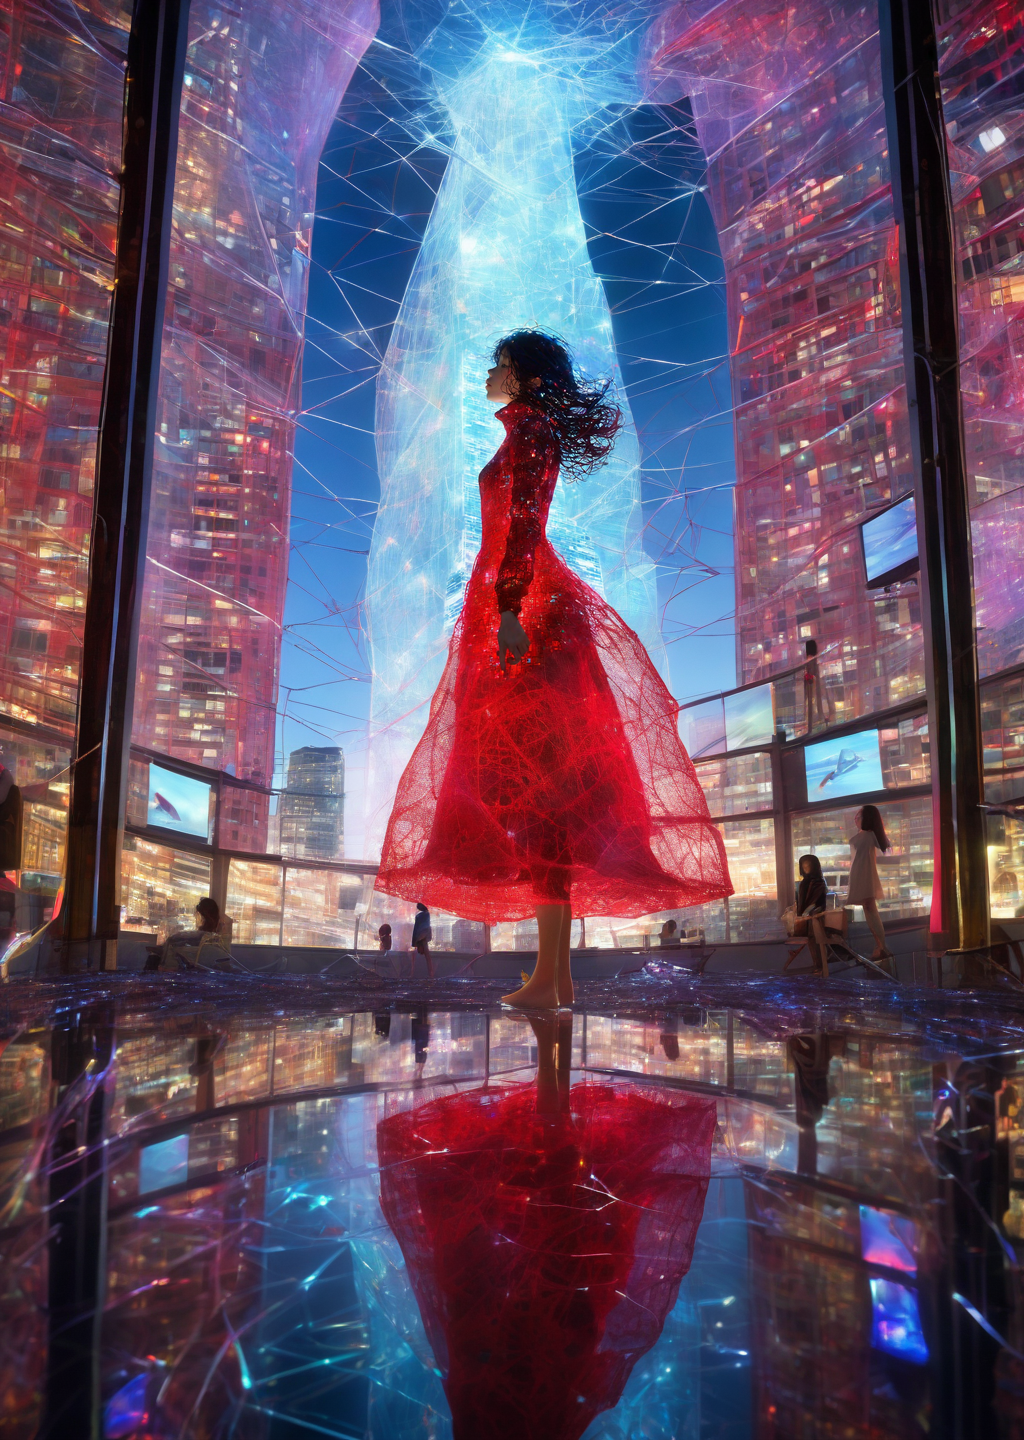 00390-3845381158-(Chiharu Shiota) colorful, dream-like, female-figures, immersive, installation, playful, Swiss, vibrant, video-art 1girl As the.png